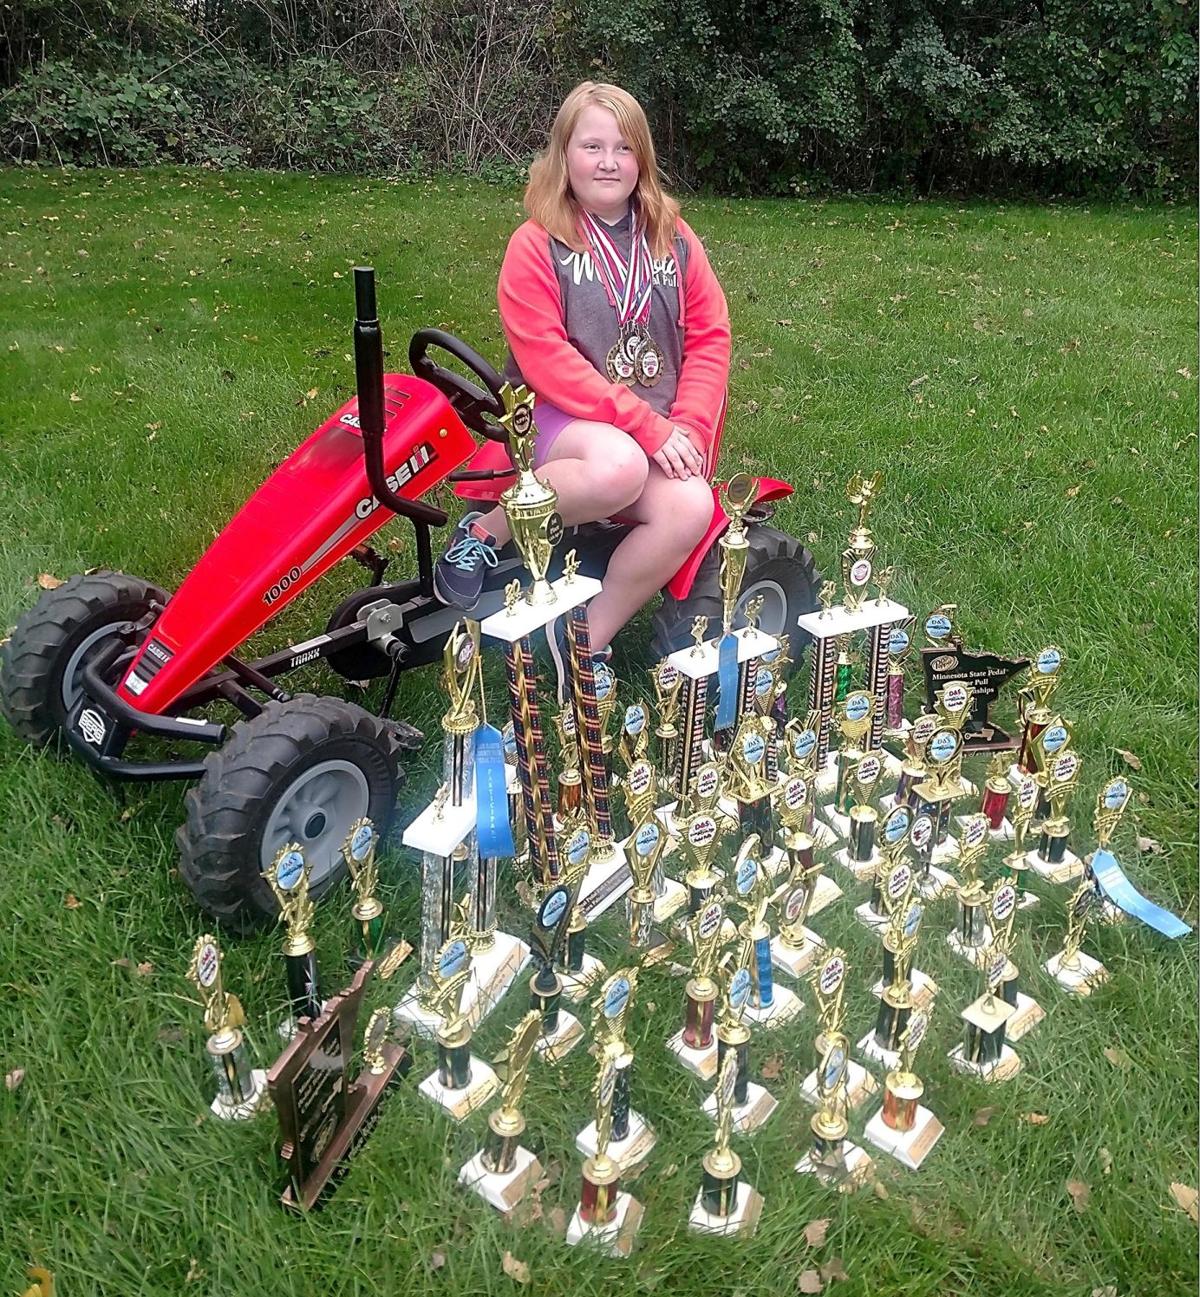 Pedal puller pushes herself to her limits, wins national title Local